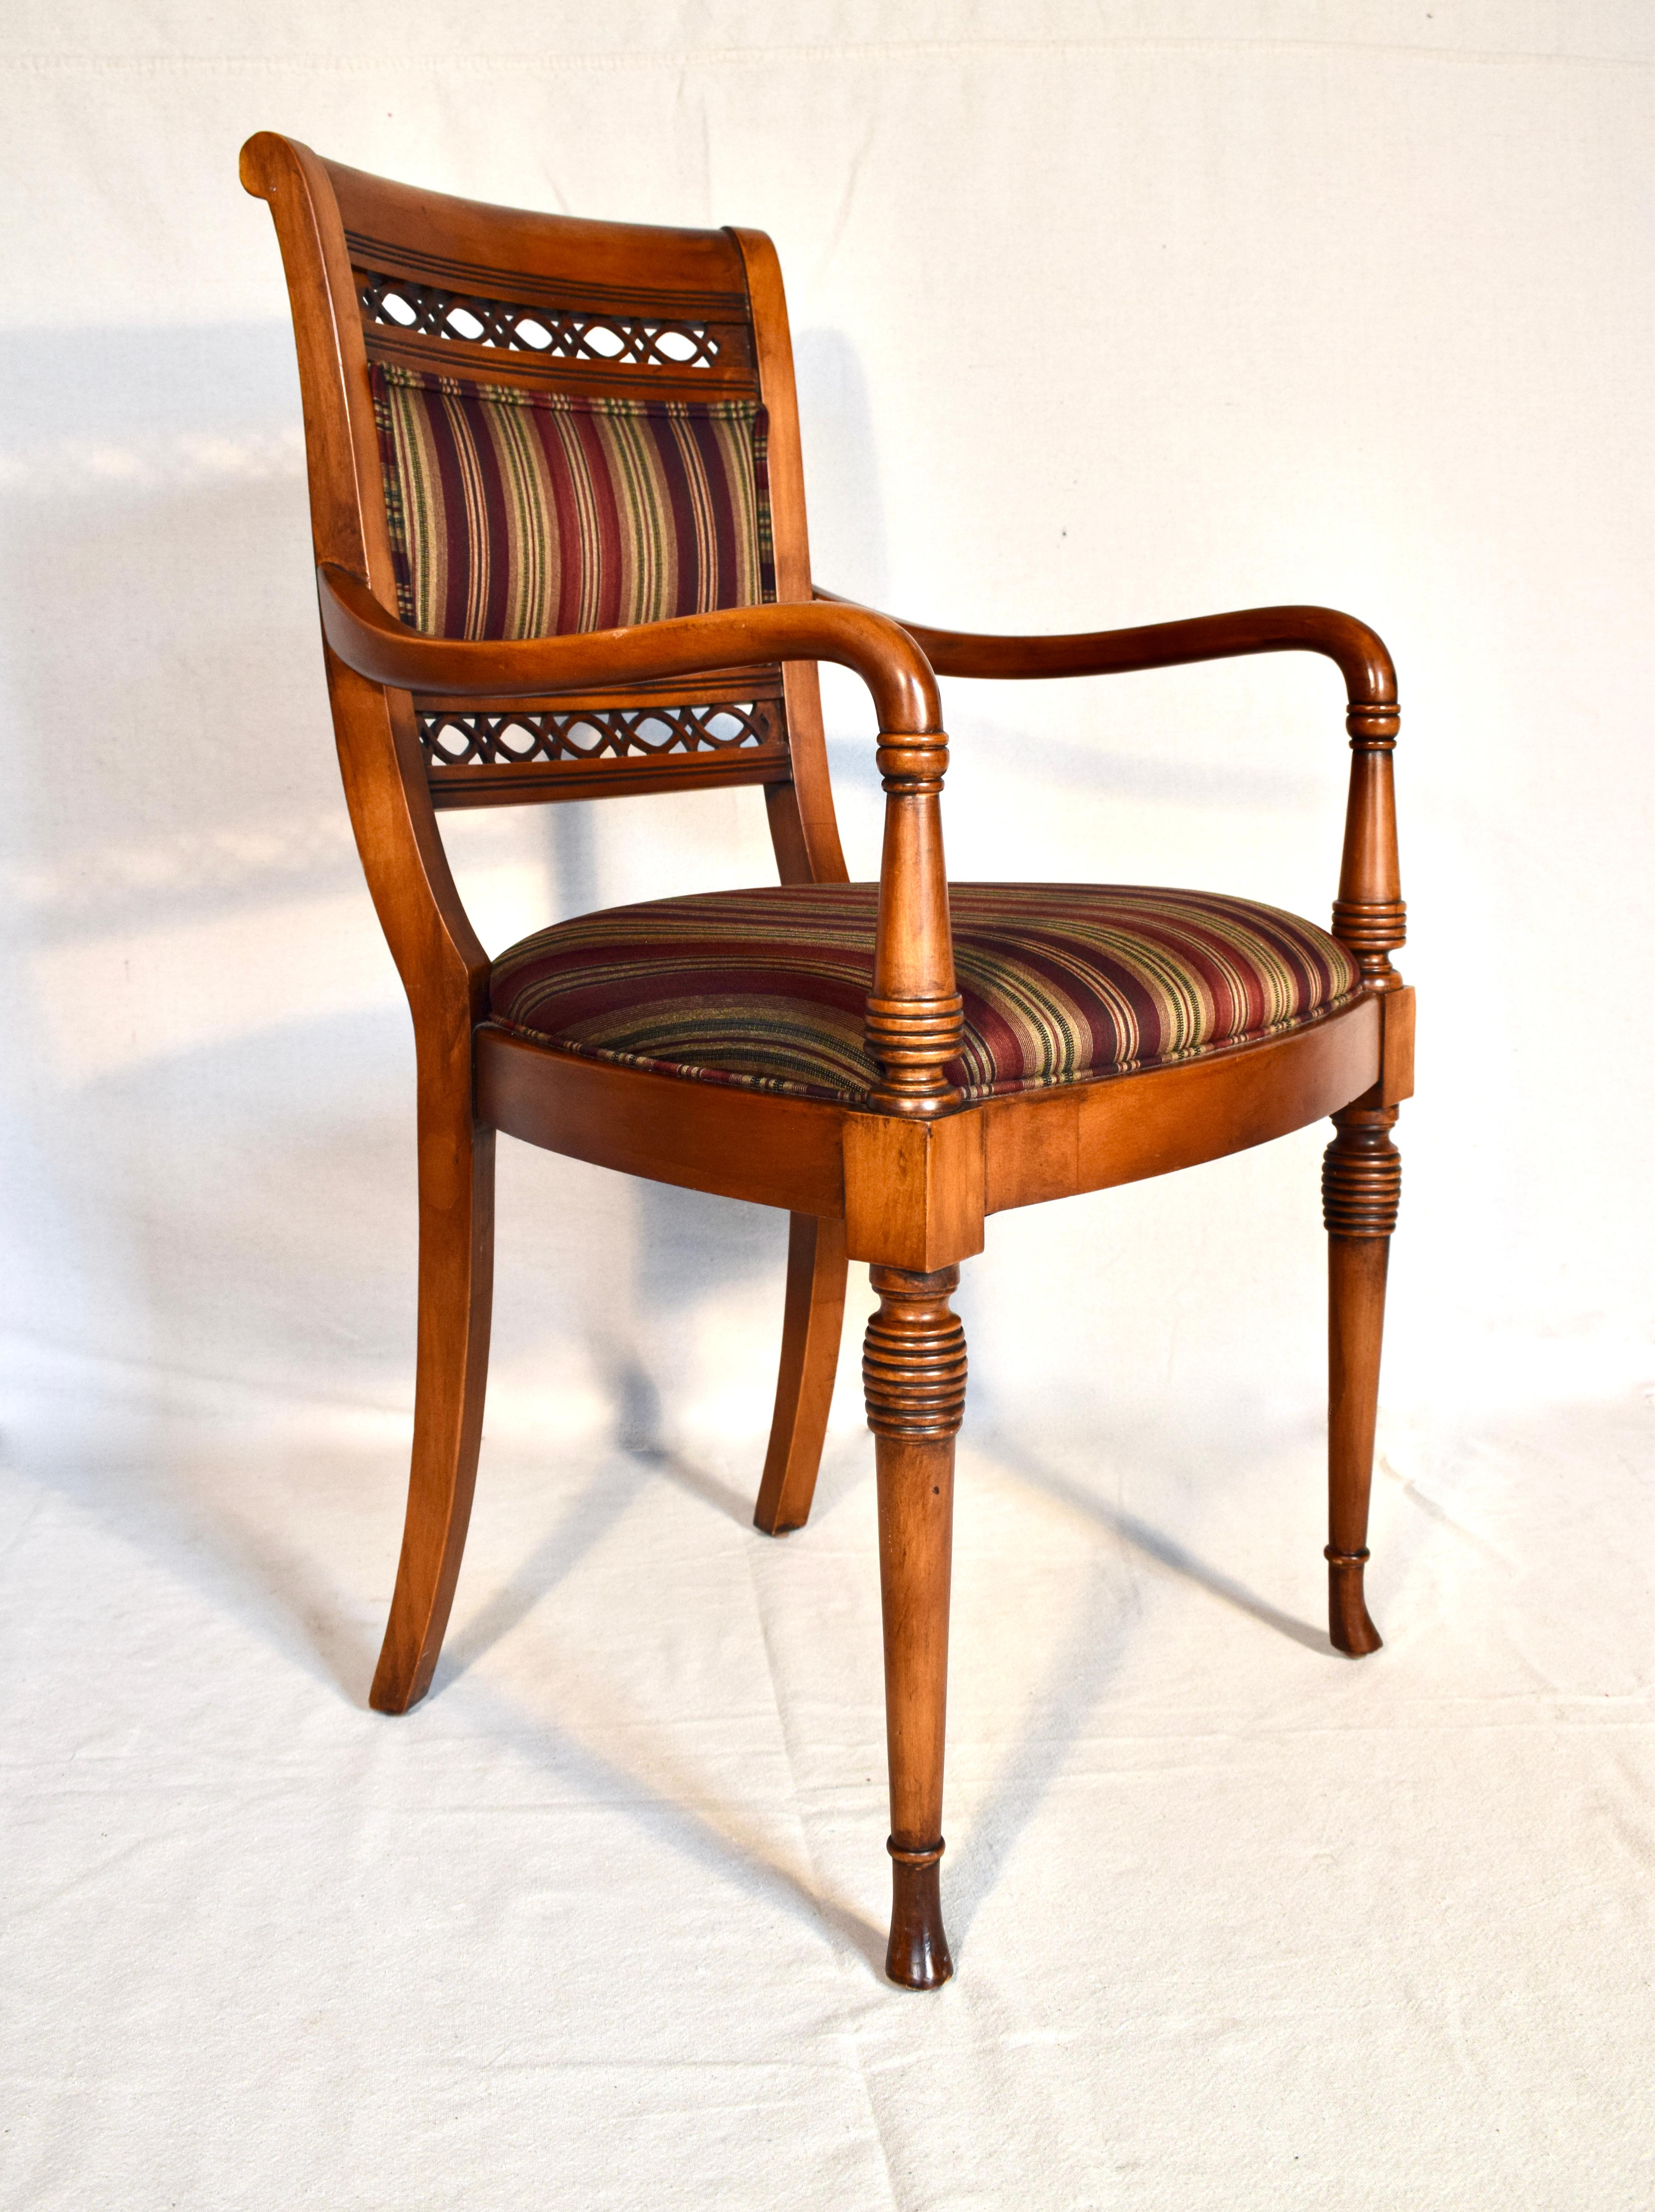 Heirloom quality hand crafted Regency style armchair made in Italy with original tags in rarely if ever used condition. Graceful lines & turnings in the manner & quality of Baker or .Hickory Chair furniture. Seat 19